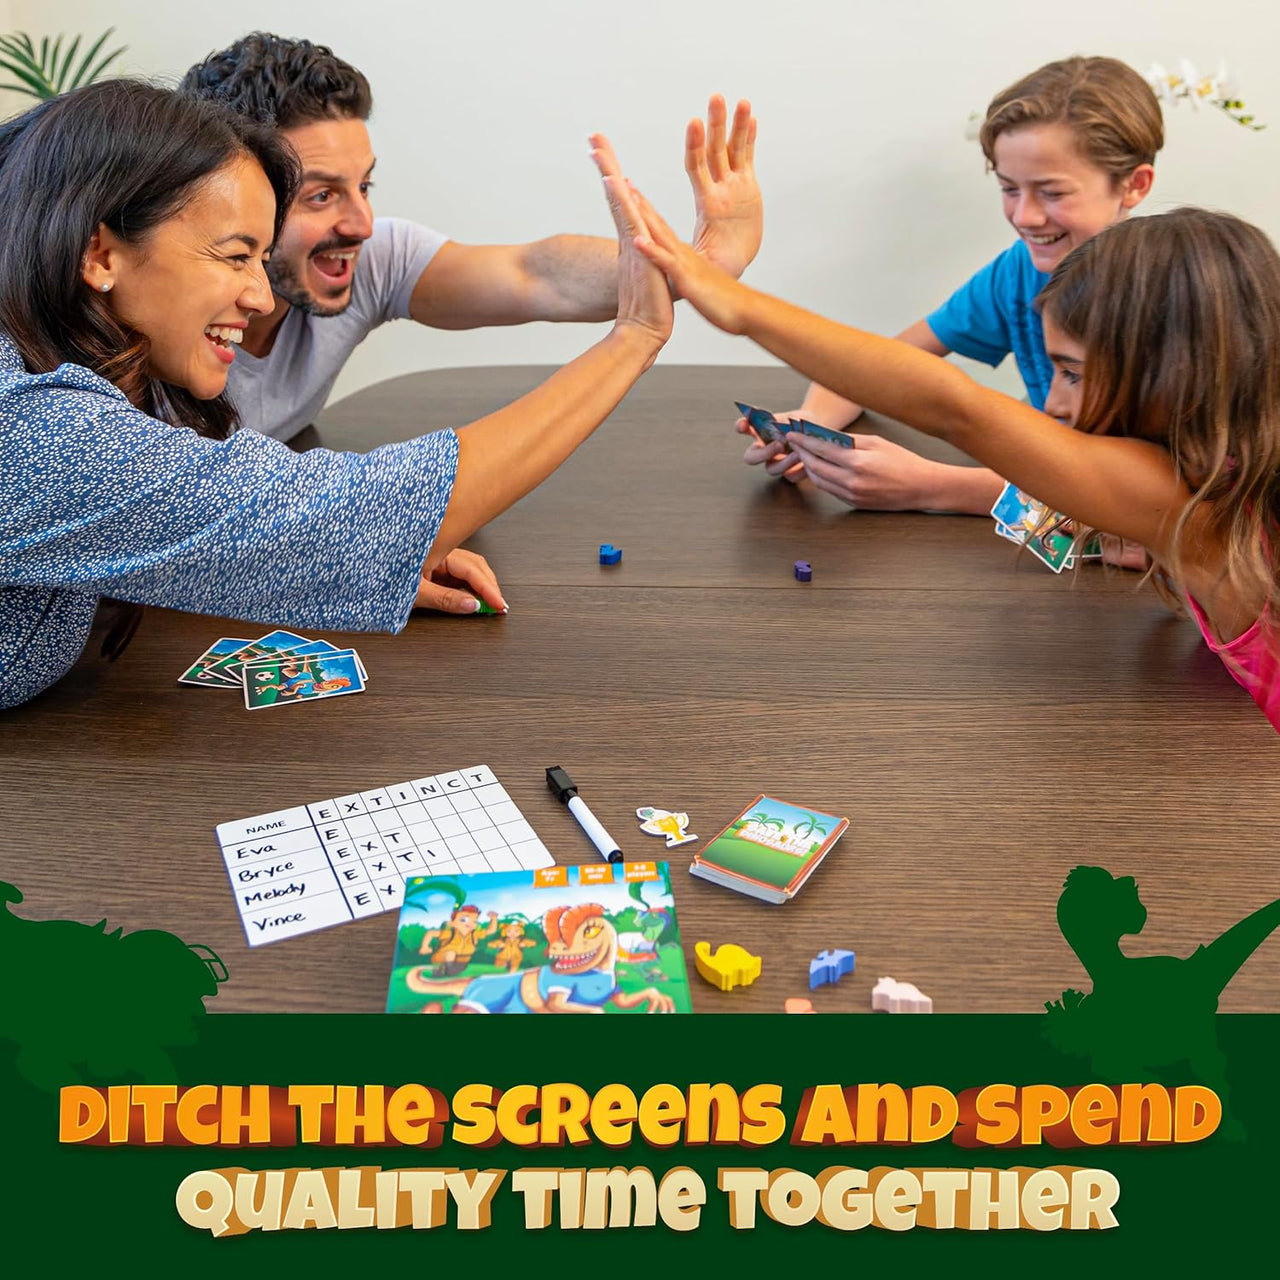 Save The Dinosaurs Card Game